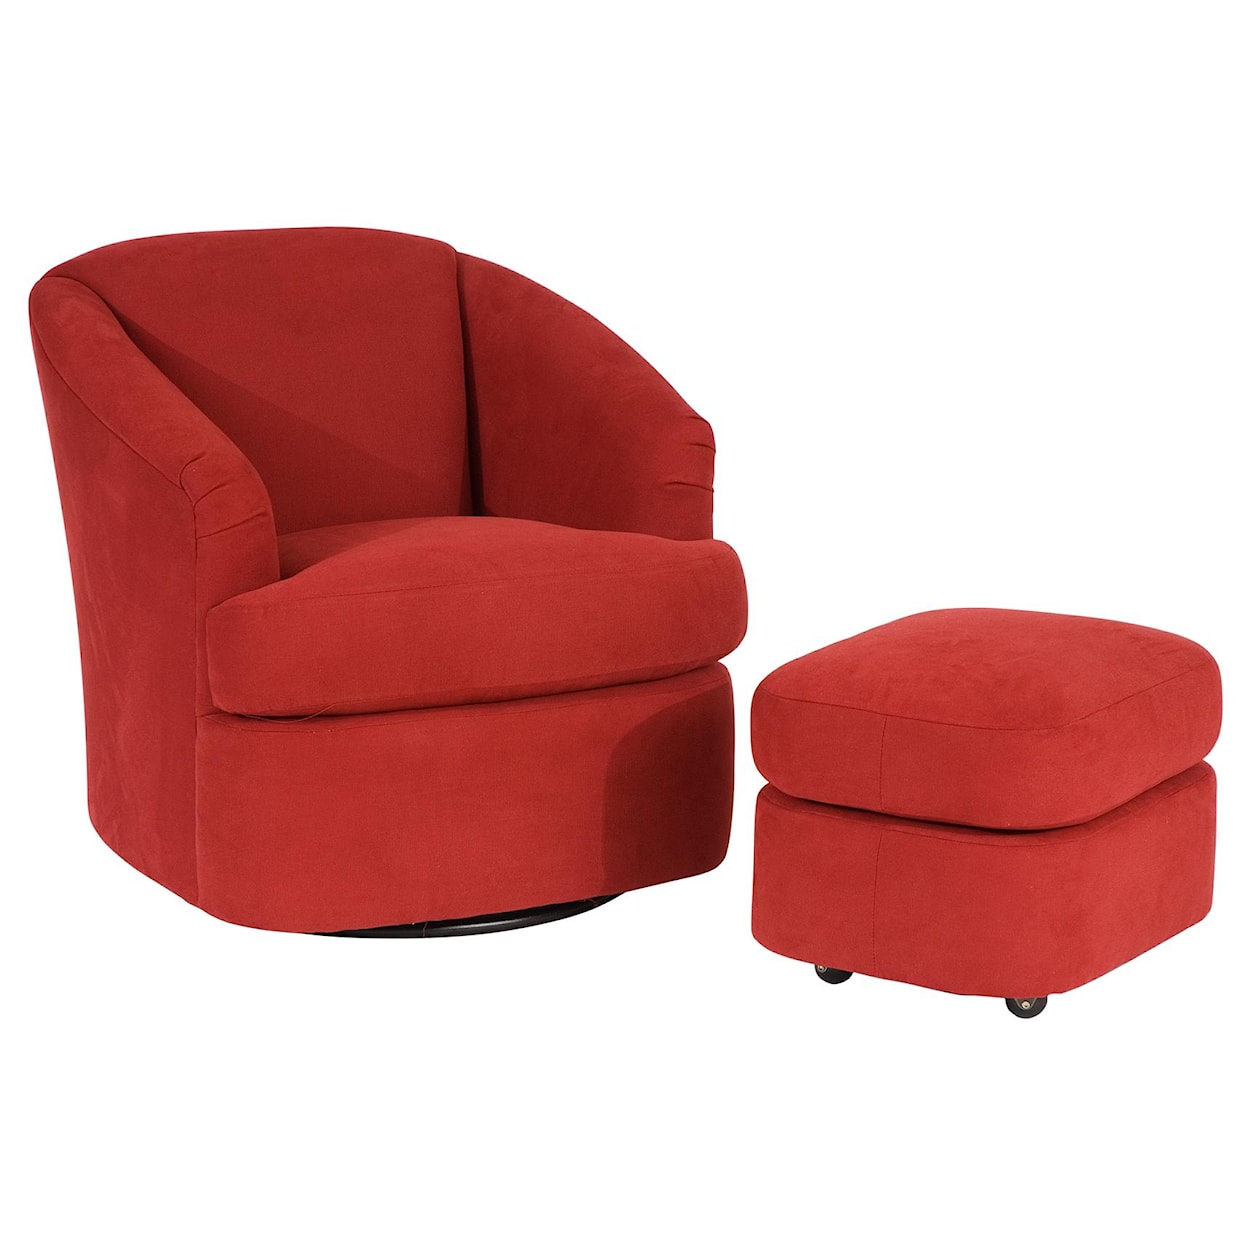 Smith Brothers Smith Brothers Contemporary Swivel Chair and Ottoman